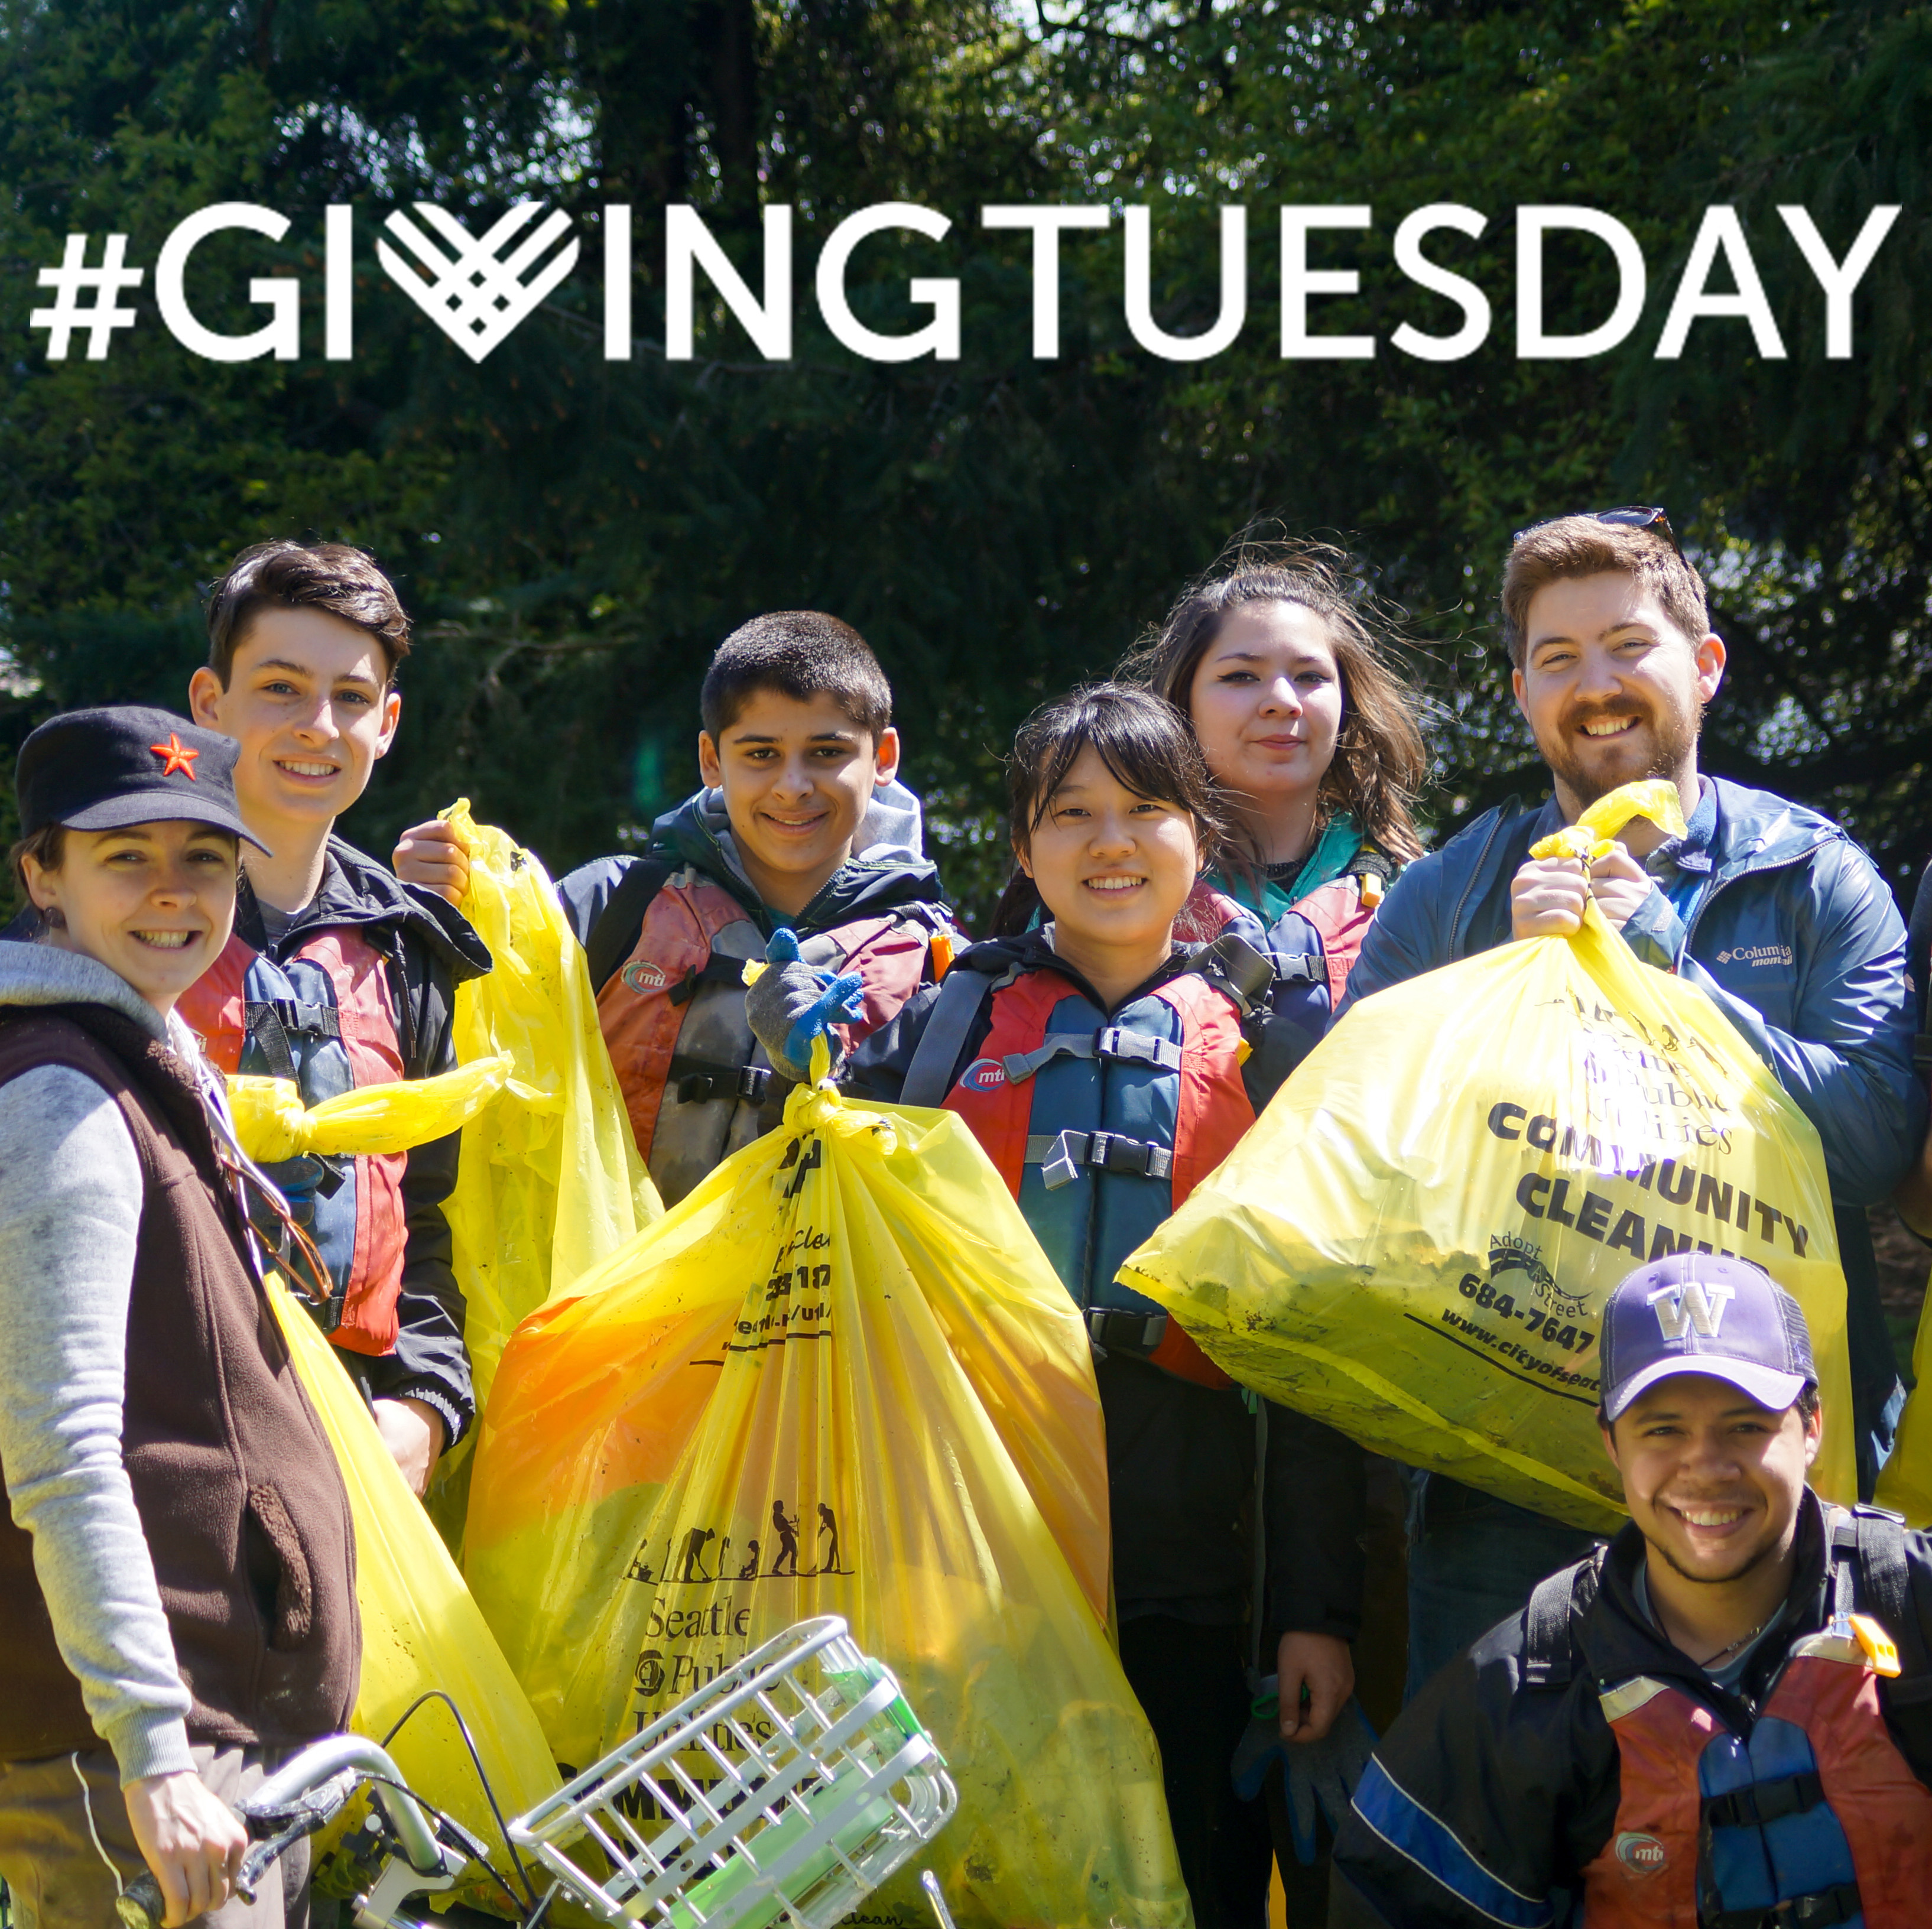 The Giving Tuesday logo appears over an image of volunteers at a cleanup holding trash bags and smiling at the camera.